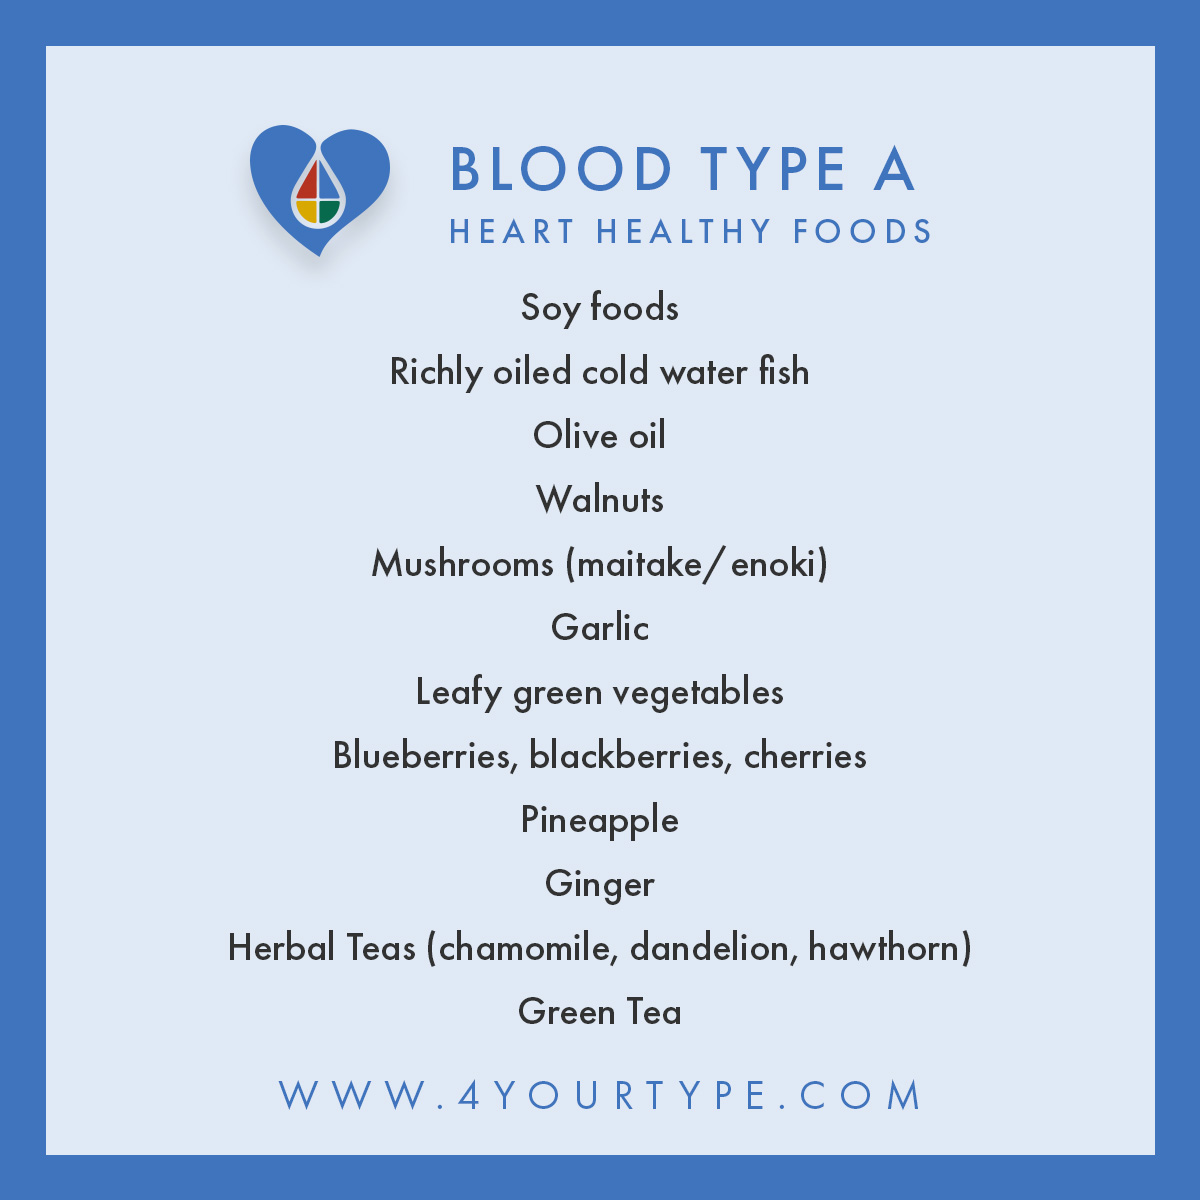 Heart healthy foods blood type A